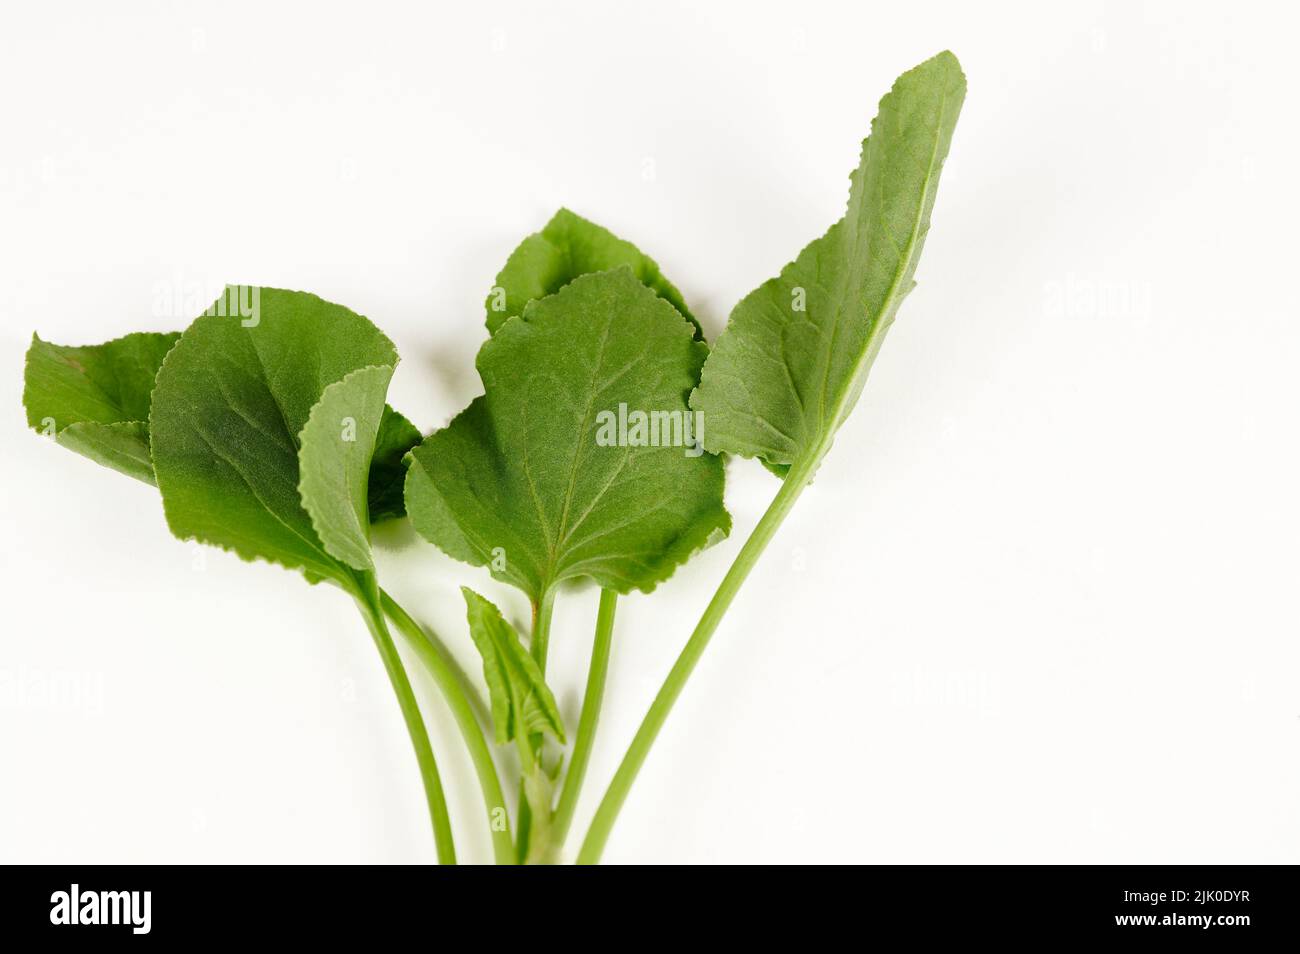 Closeup view of Green Sorrel leaves (rumex vesicarius) on a white background Stock Photo